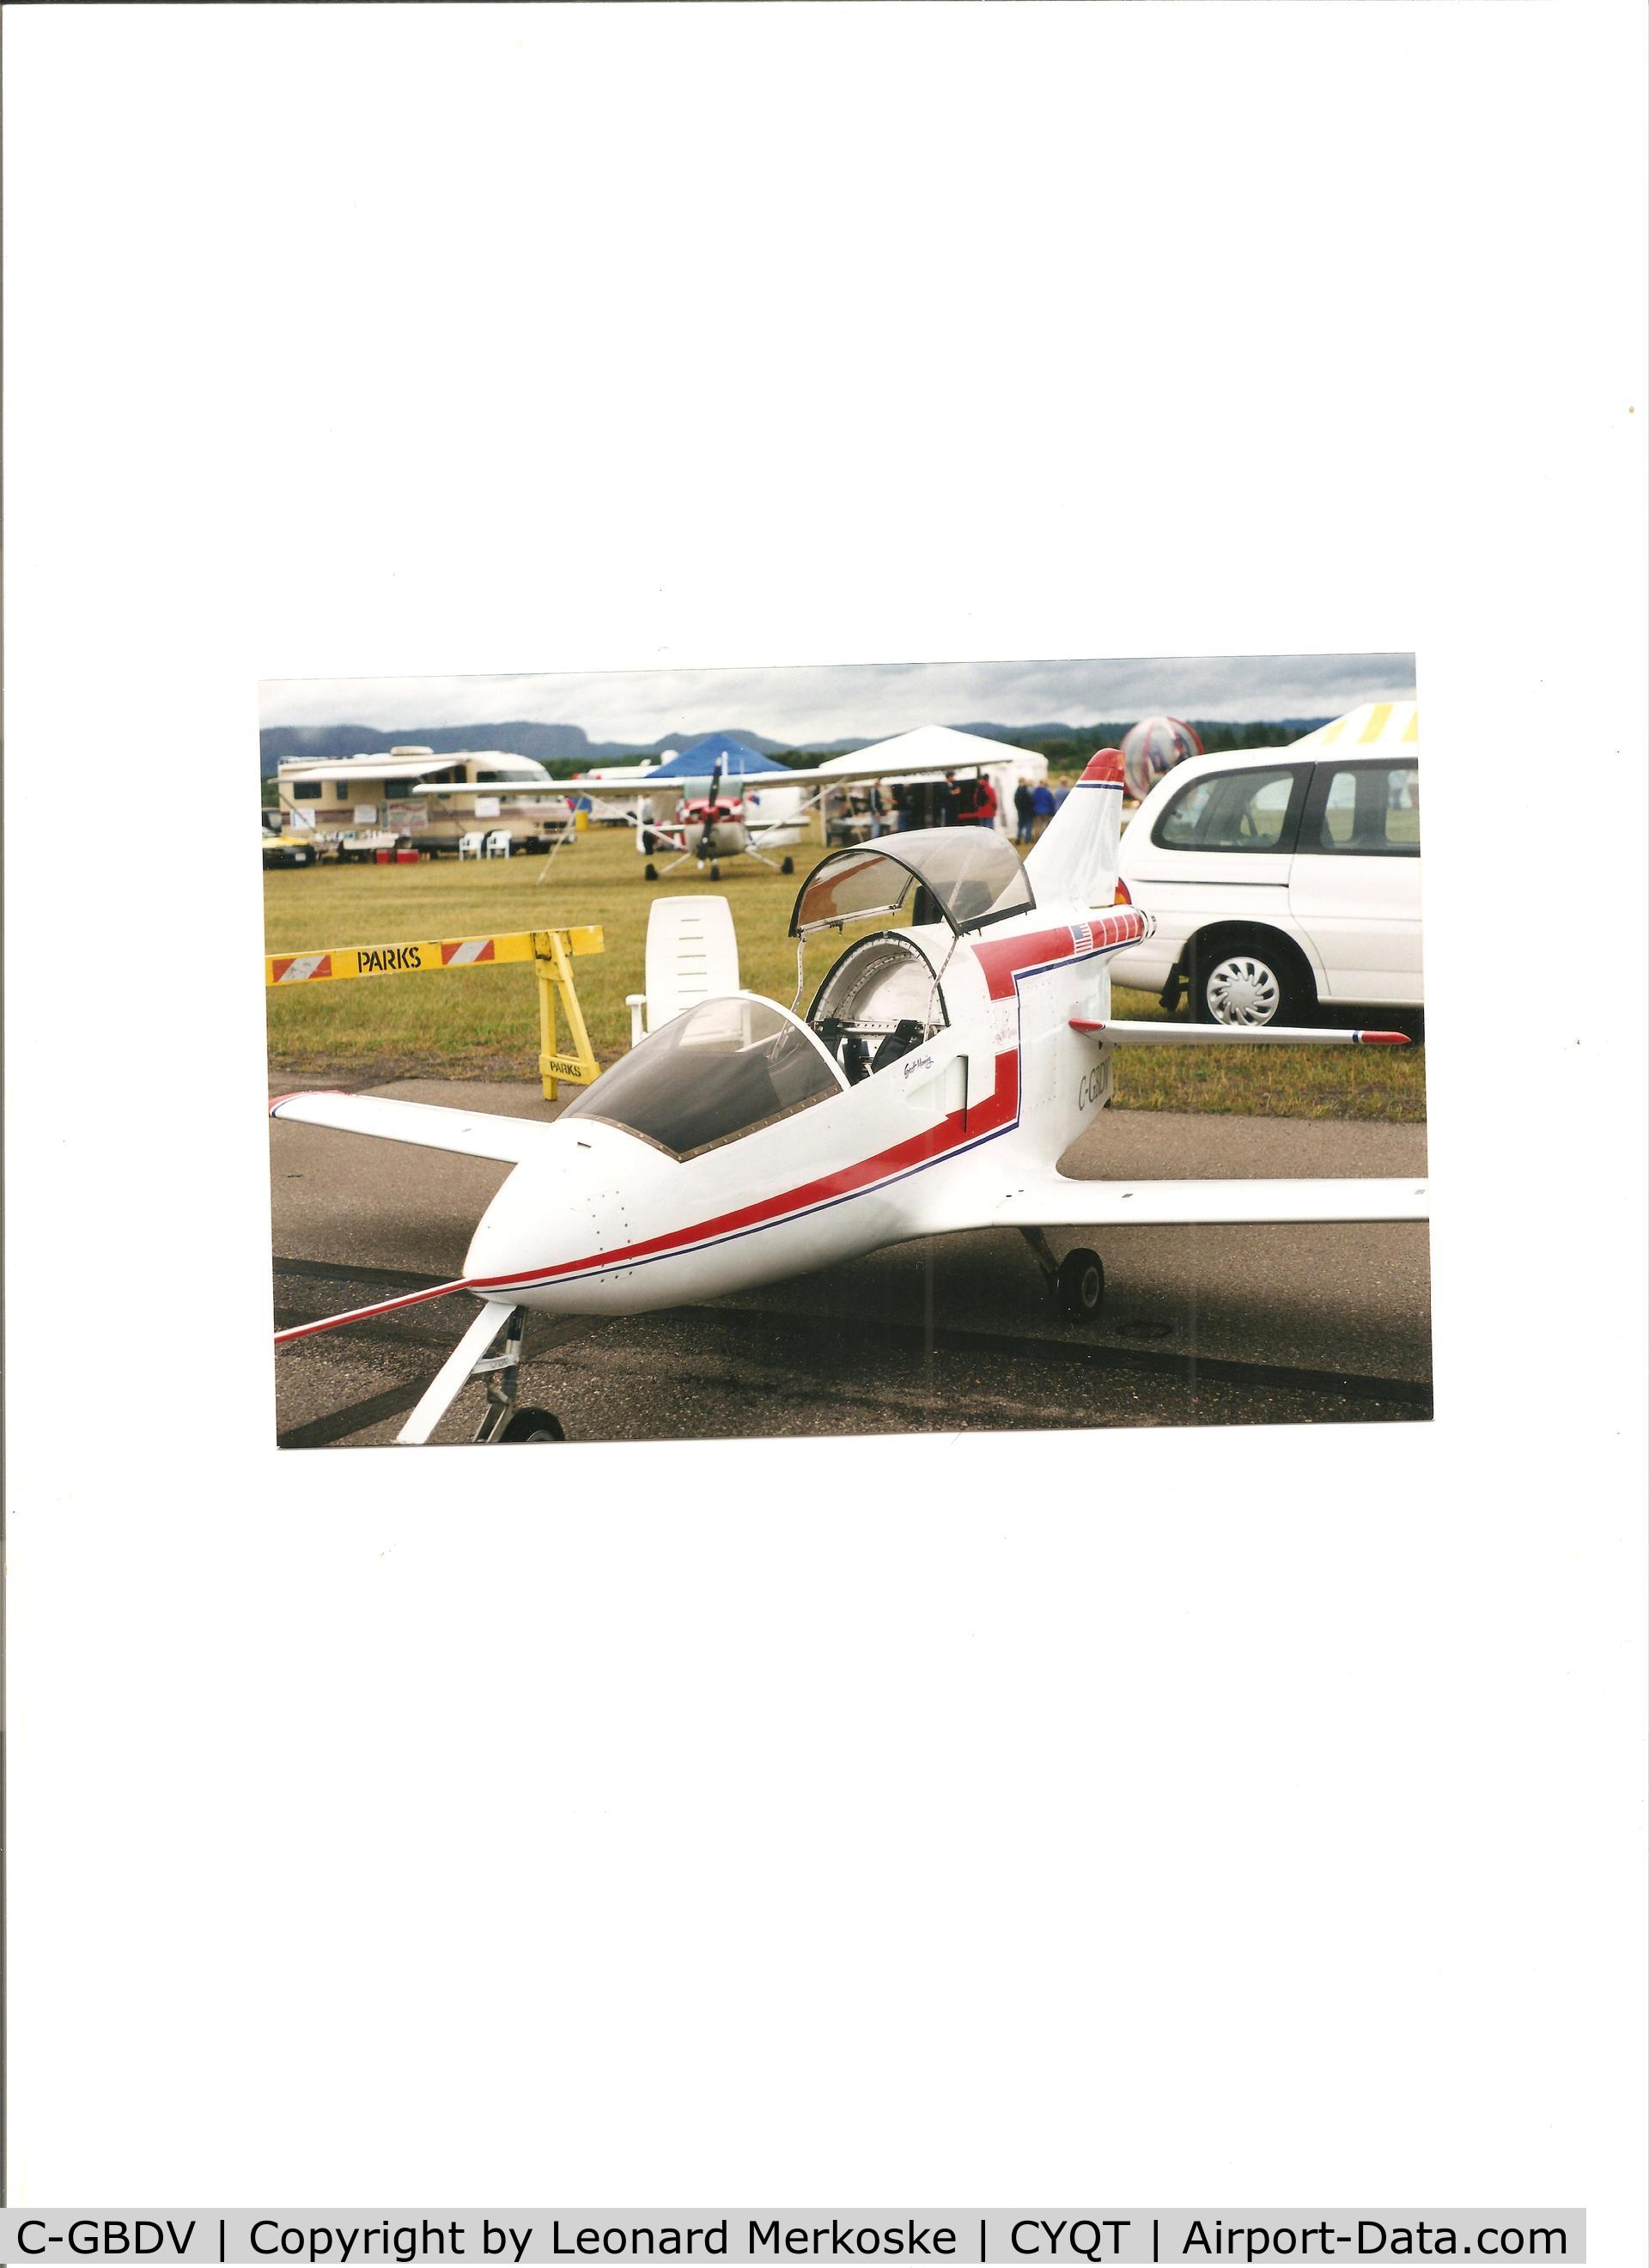 C-GBDV, 2002 Bede BD-5J C/N 4672, This aircraft was on display at a Thunder Bay, ON airshow.  It was destroyed in a fatal accident on 16 June 2006 at Ottawa, ON.